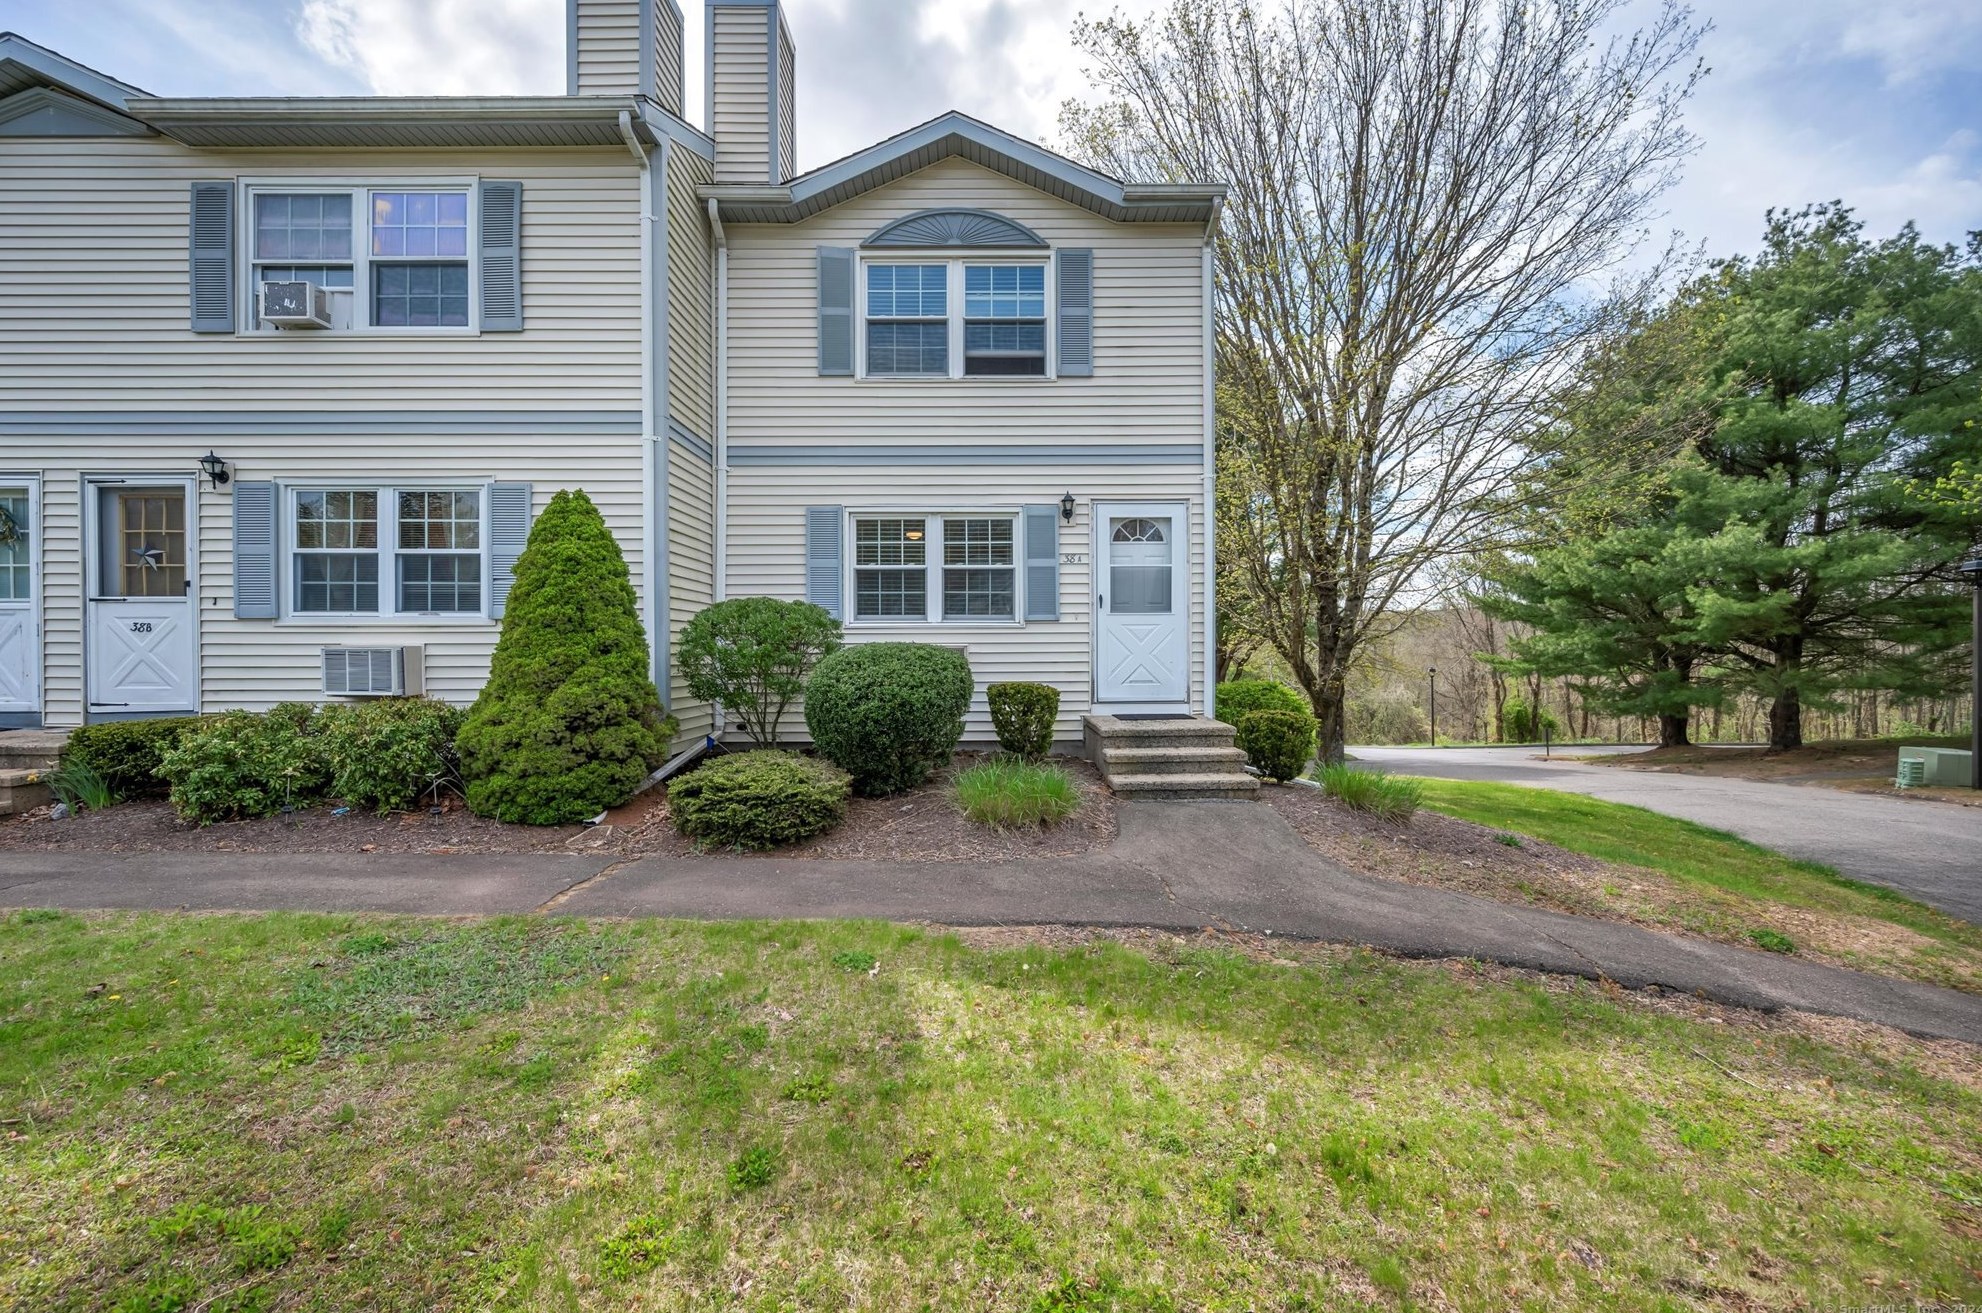 38 Crystal Ln #apt A, Storrs Mansfield, CT 06268